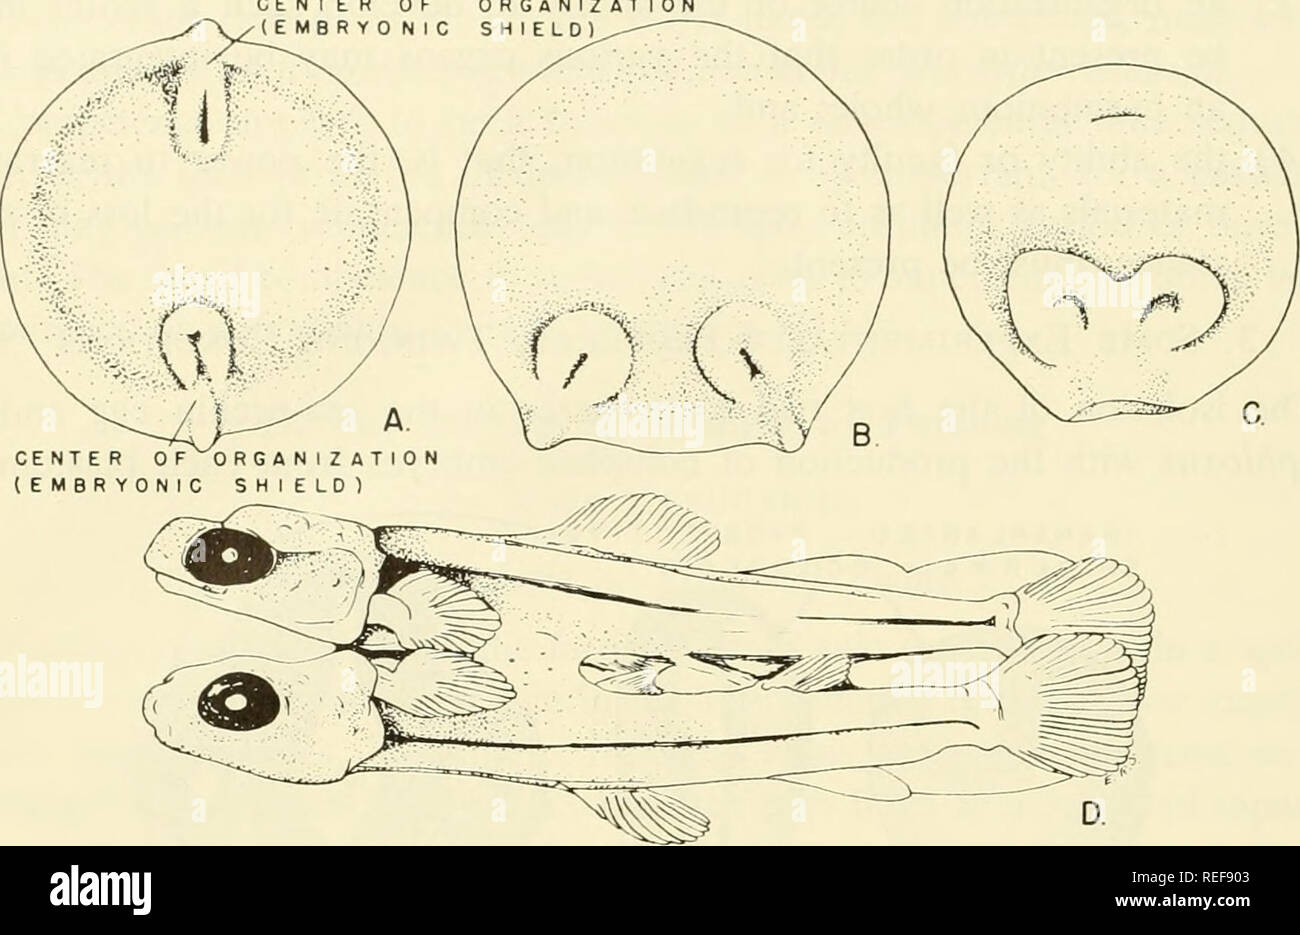 . Comparative embryology of the vertebrates; with 2057 drawings and photos. grouped as 380 illus. Vertebrates -- Embryology; Comparative embryology. 382 THE BLASTULA IN RELATION TO INNATE CONDITIONS CENTER OF (EMBRYO N I 0 R G A N IZ AT SHIELD). Fig. 185. Twinning in teleost fishes. (After Morgan, '34; Embryology and Genetics, Columbia University Press, pp. 102-104. A, B, C from Rauber; D from Stockard.) In certain teleost fishes, especially in the trout, under certain environmental conditions, two or more organization centers arise in the early gastrula. (A-C) These represent such conditions. Stock Photo